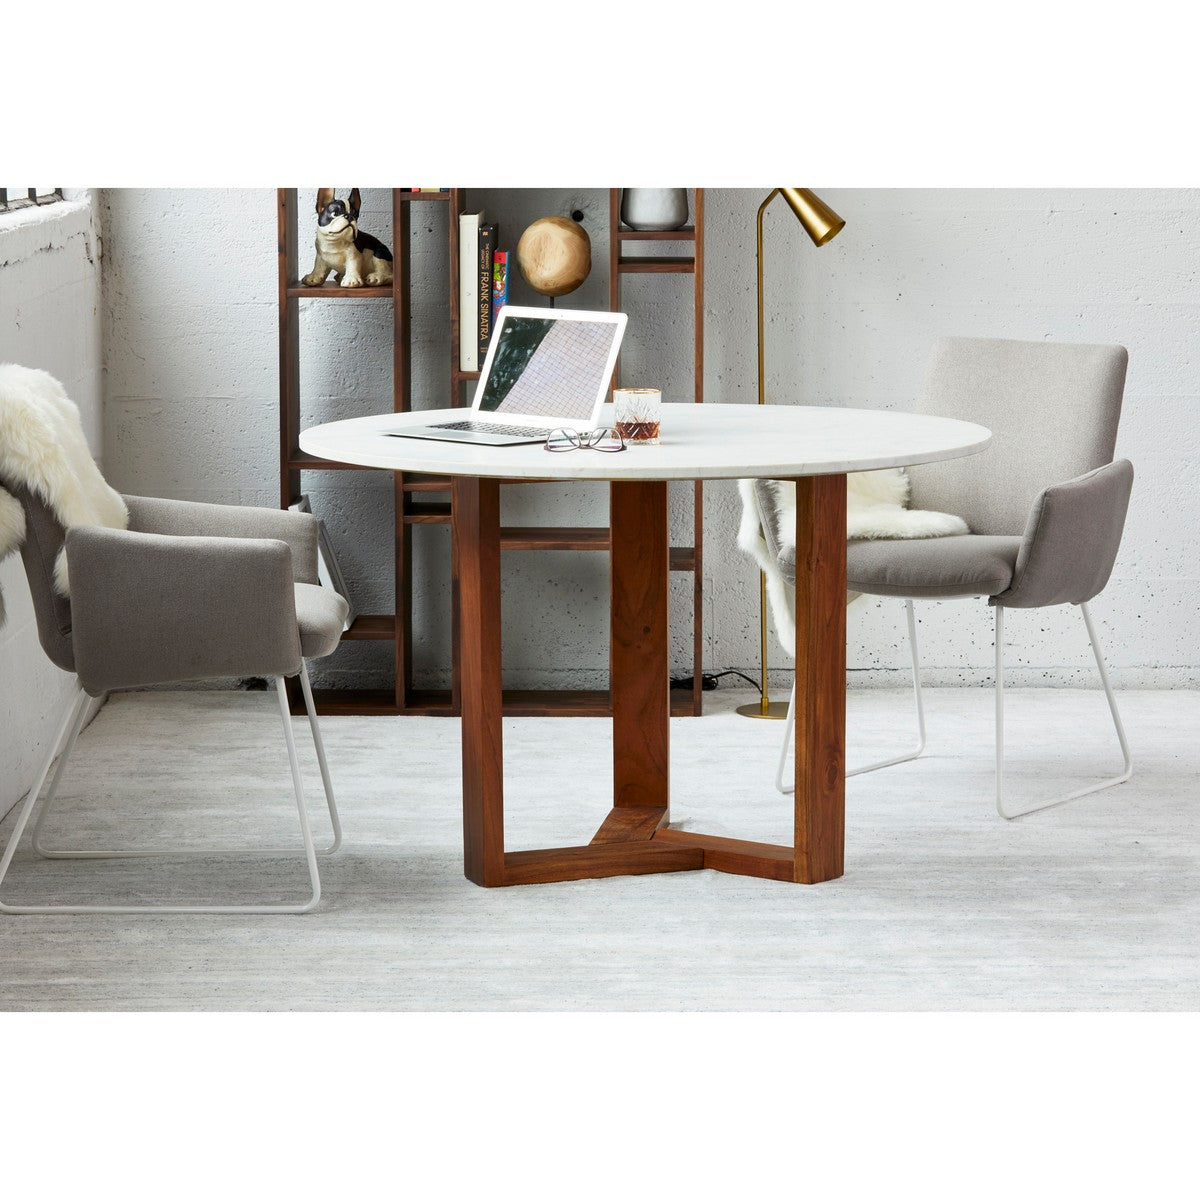 Moe's Home Collection Jinxx Dining Table Brown - JD-1009-18 - Moe's Home Collection - Dining Tables - Minimal And Modern - 1